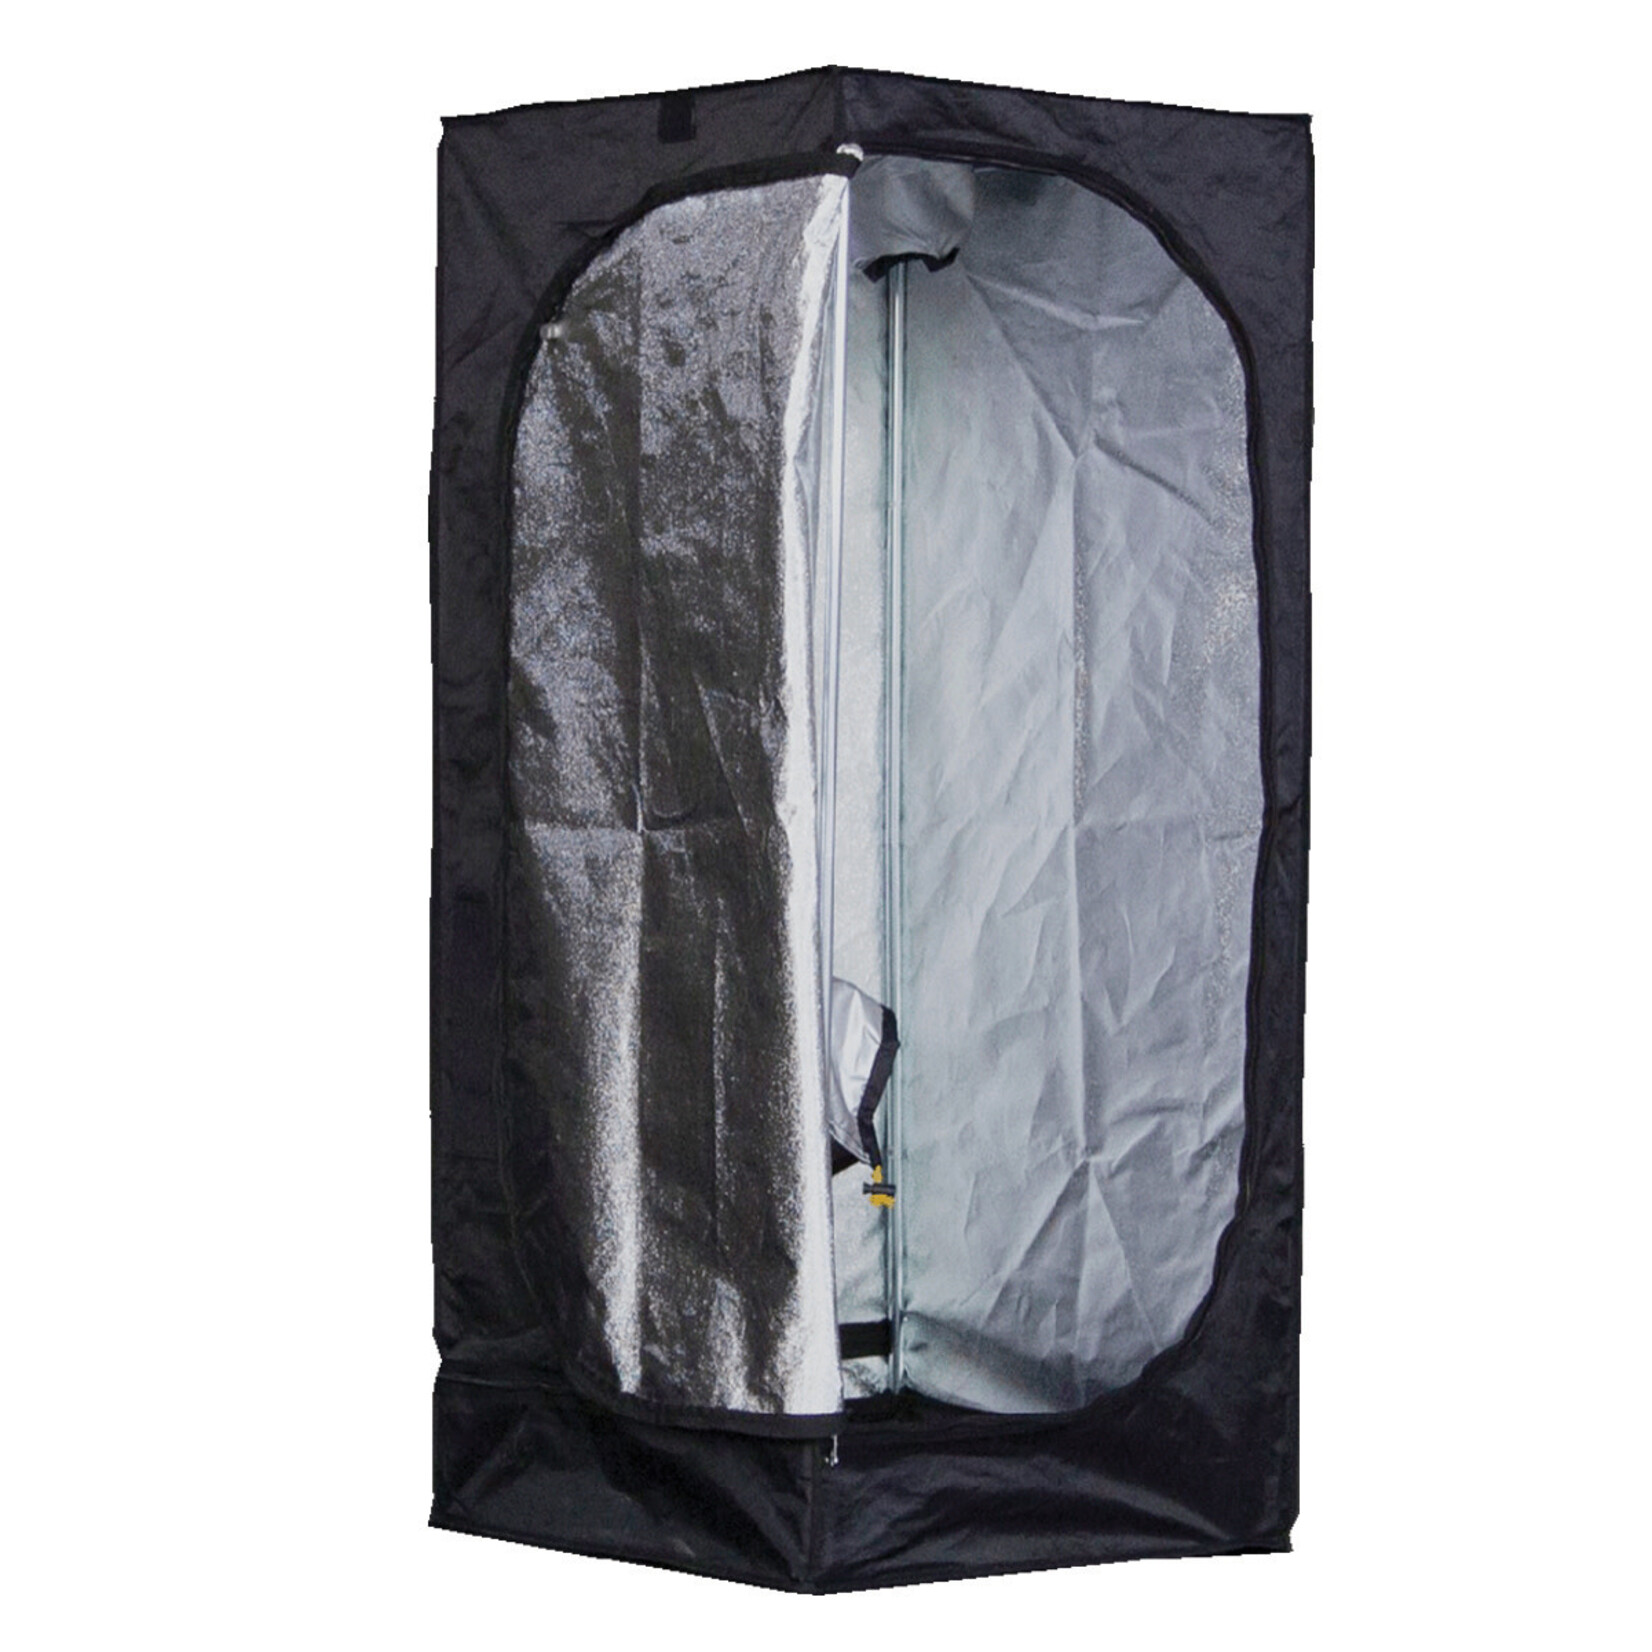 Mammoth Mammoth Classic+ 60 Grow Tent - 2ft x 2ft x 4.6ft